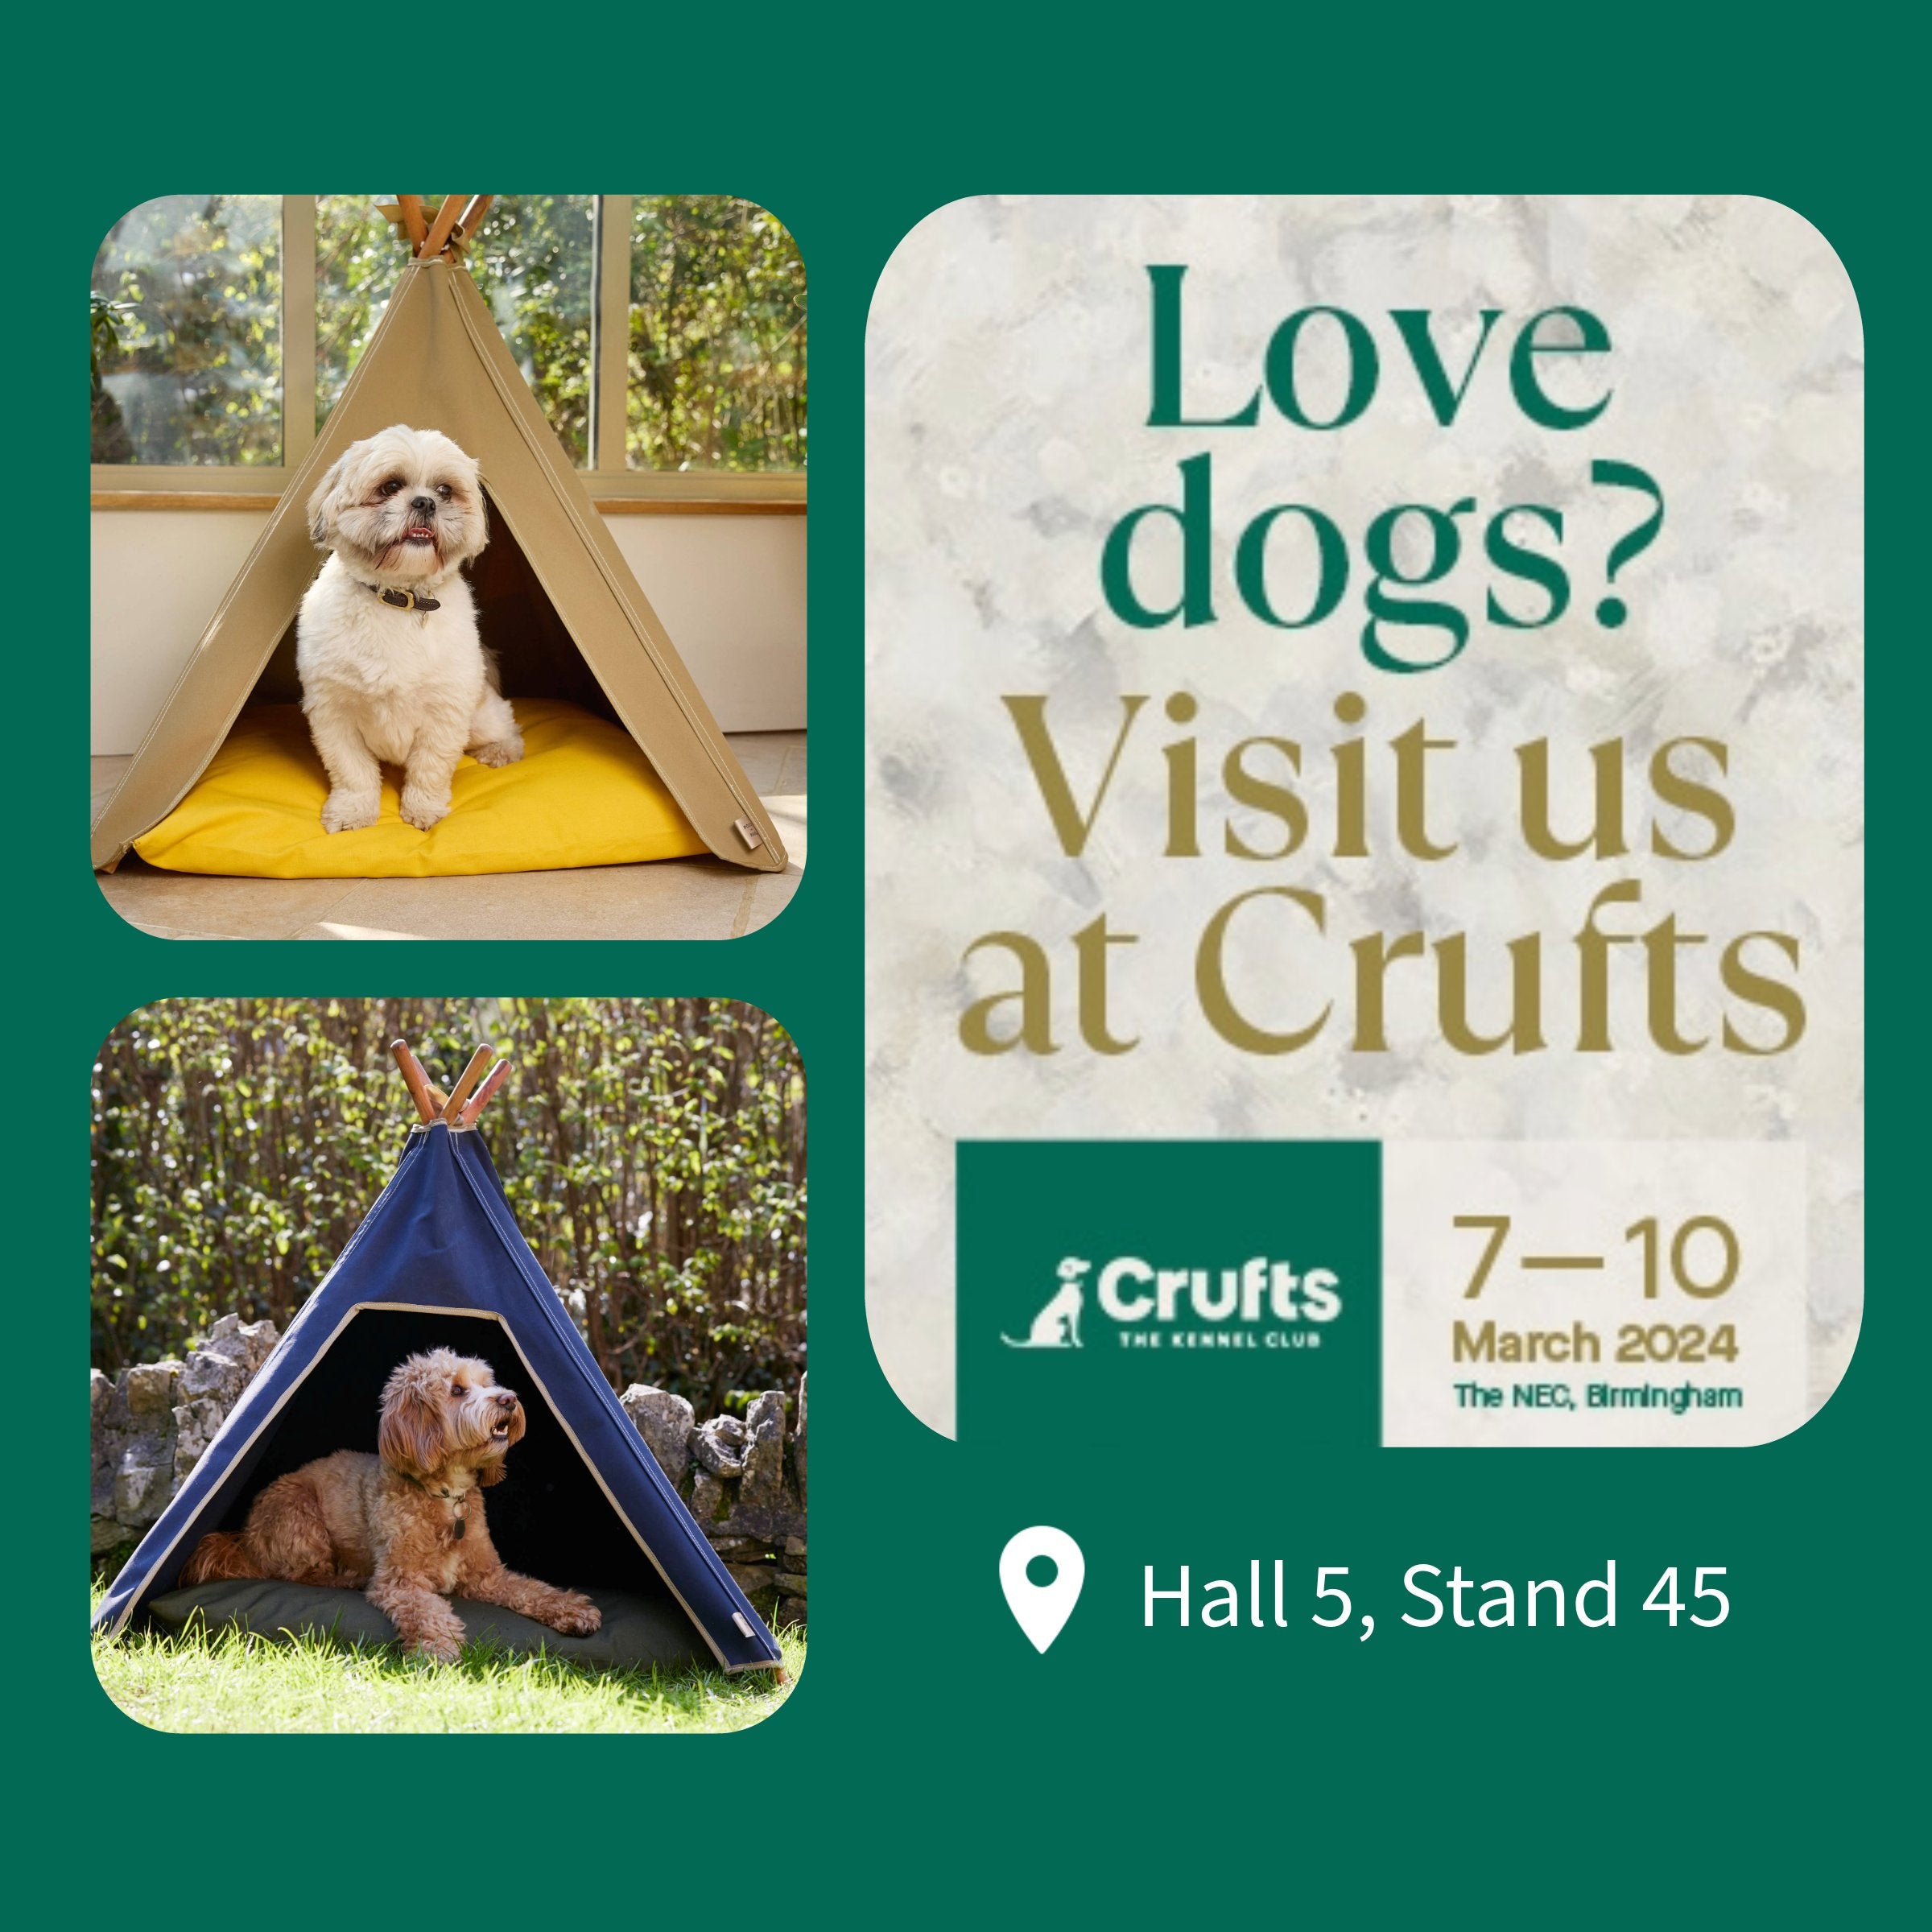 Crufts 2024_Pooch and Paws at Crufts 7-10th March at Birmingham NEC